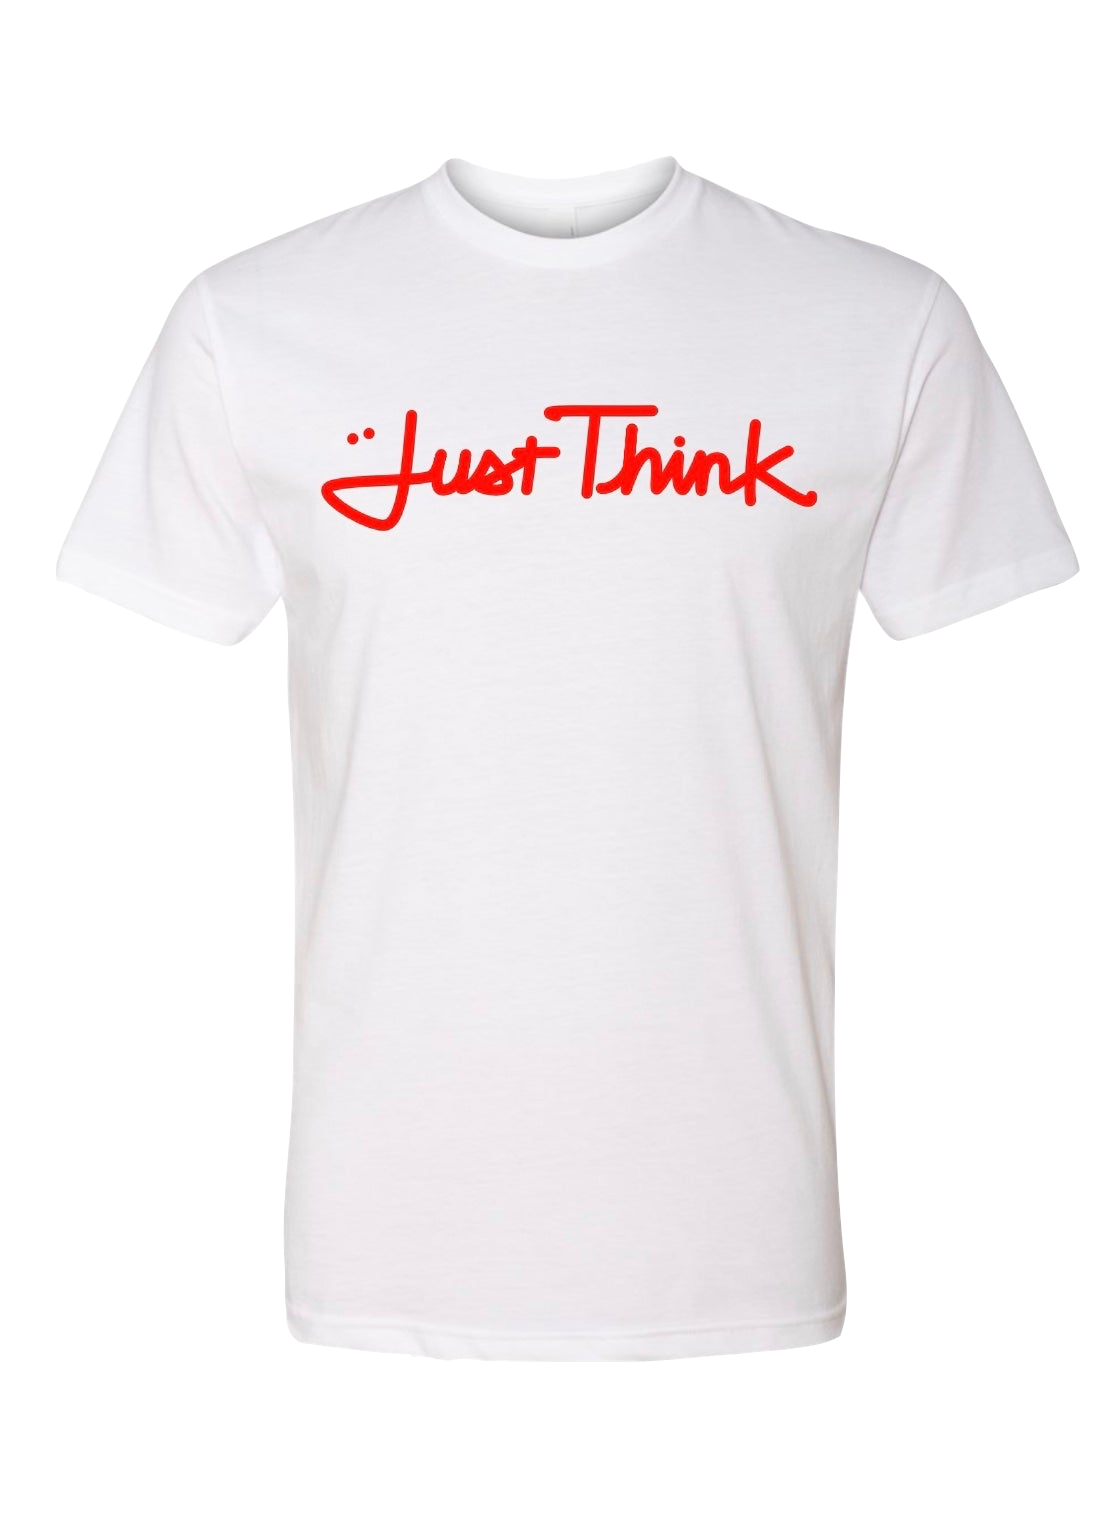 Just Think 2.0 Tee White w/ Red